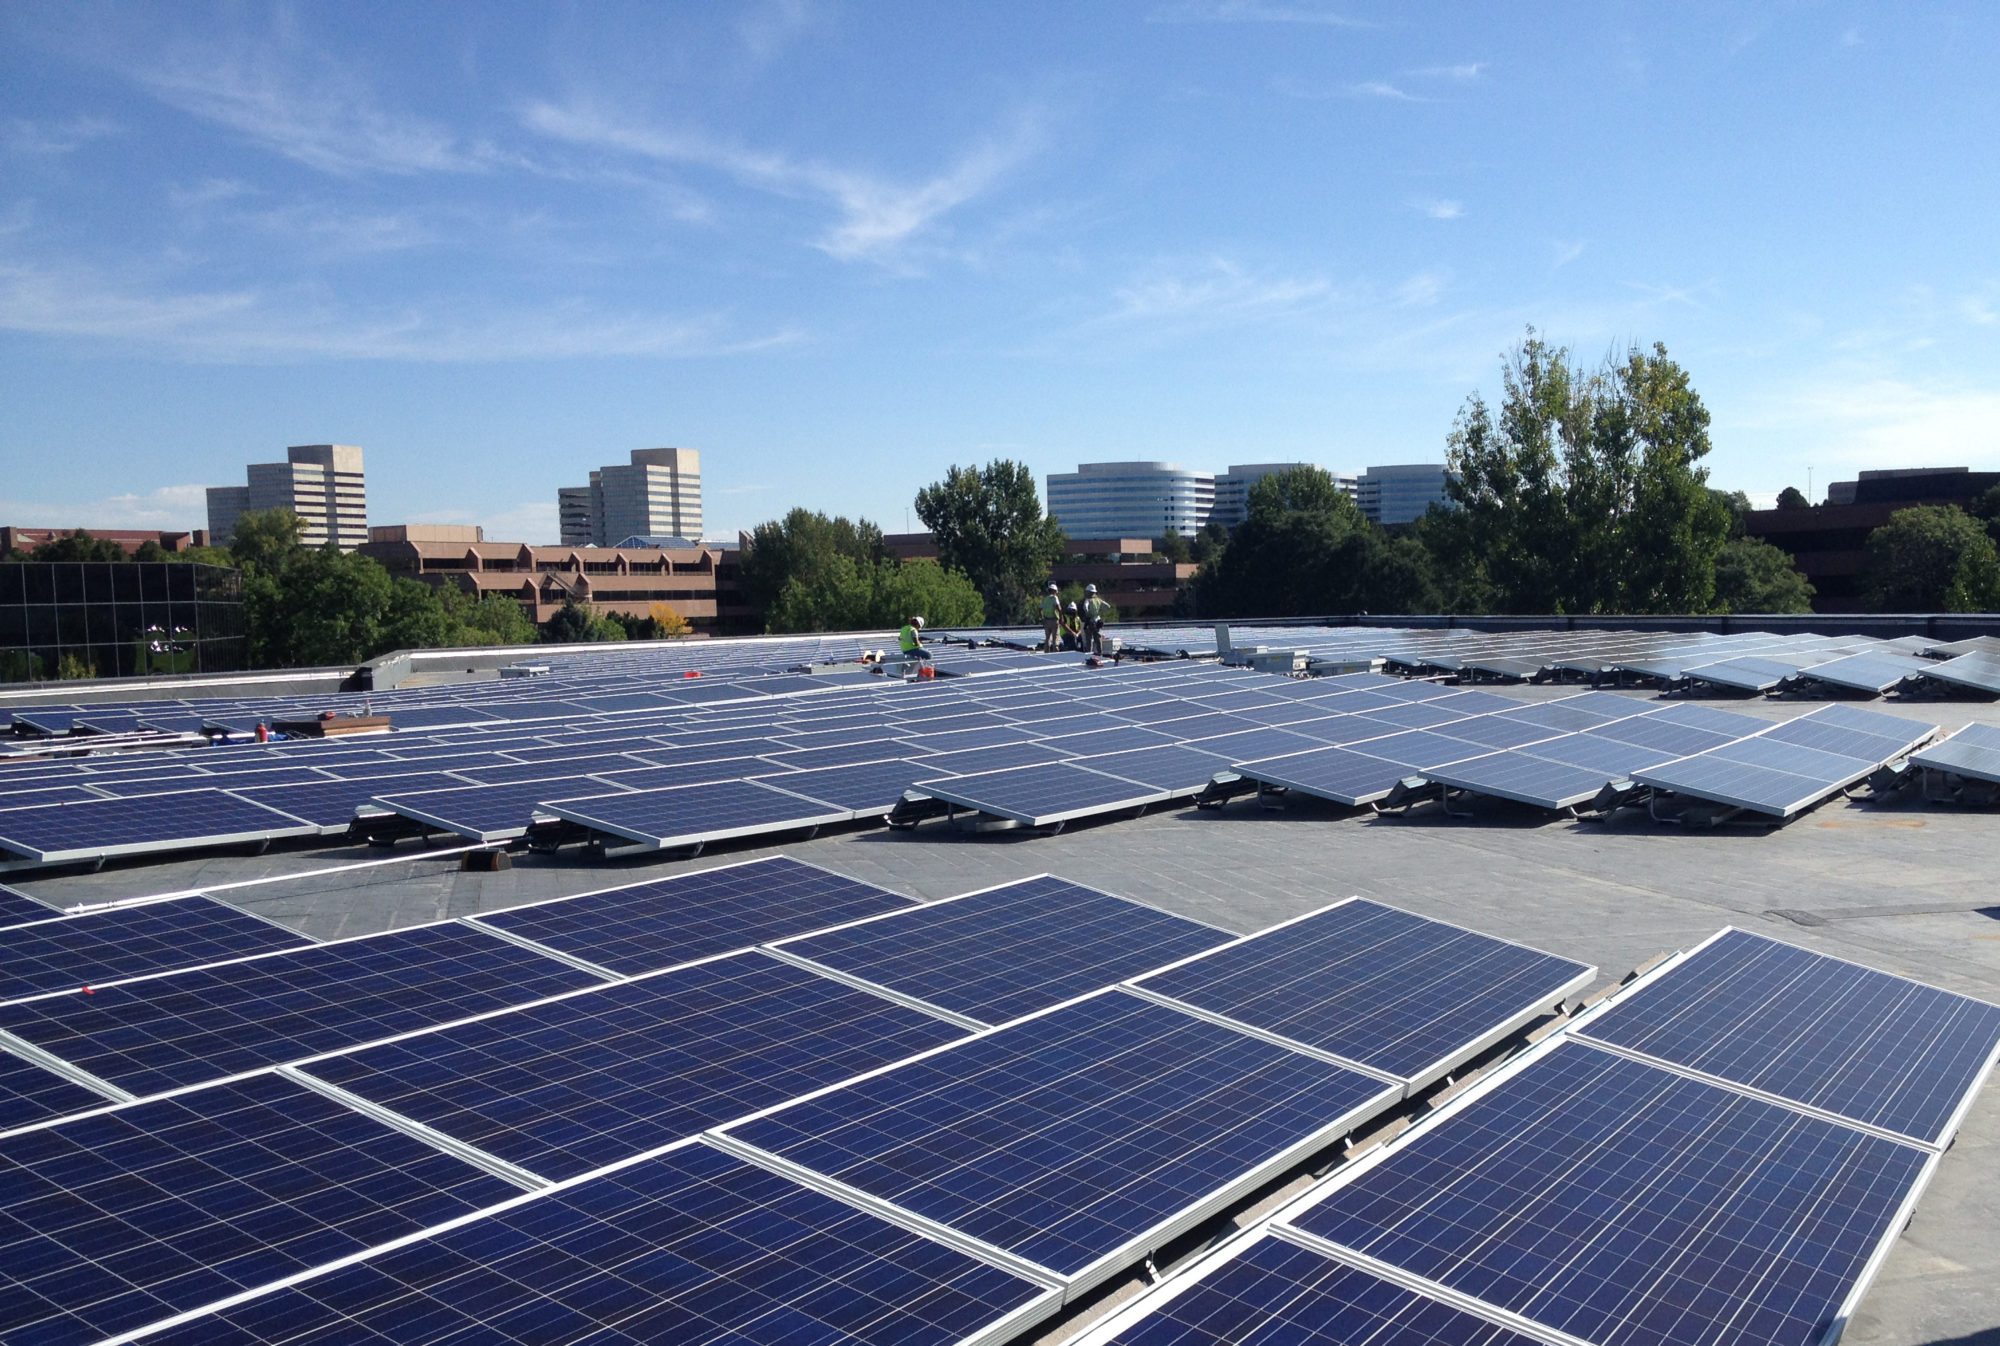 Workers install solar panels on the roof of Harlequin Plaza in Denver, Colorado.